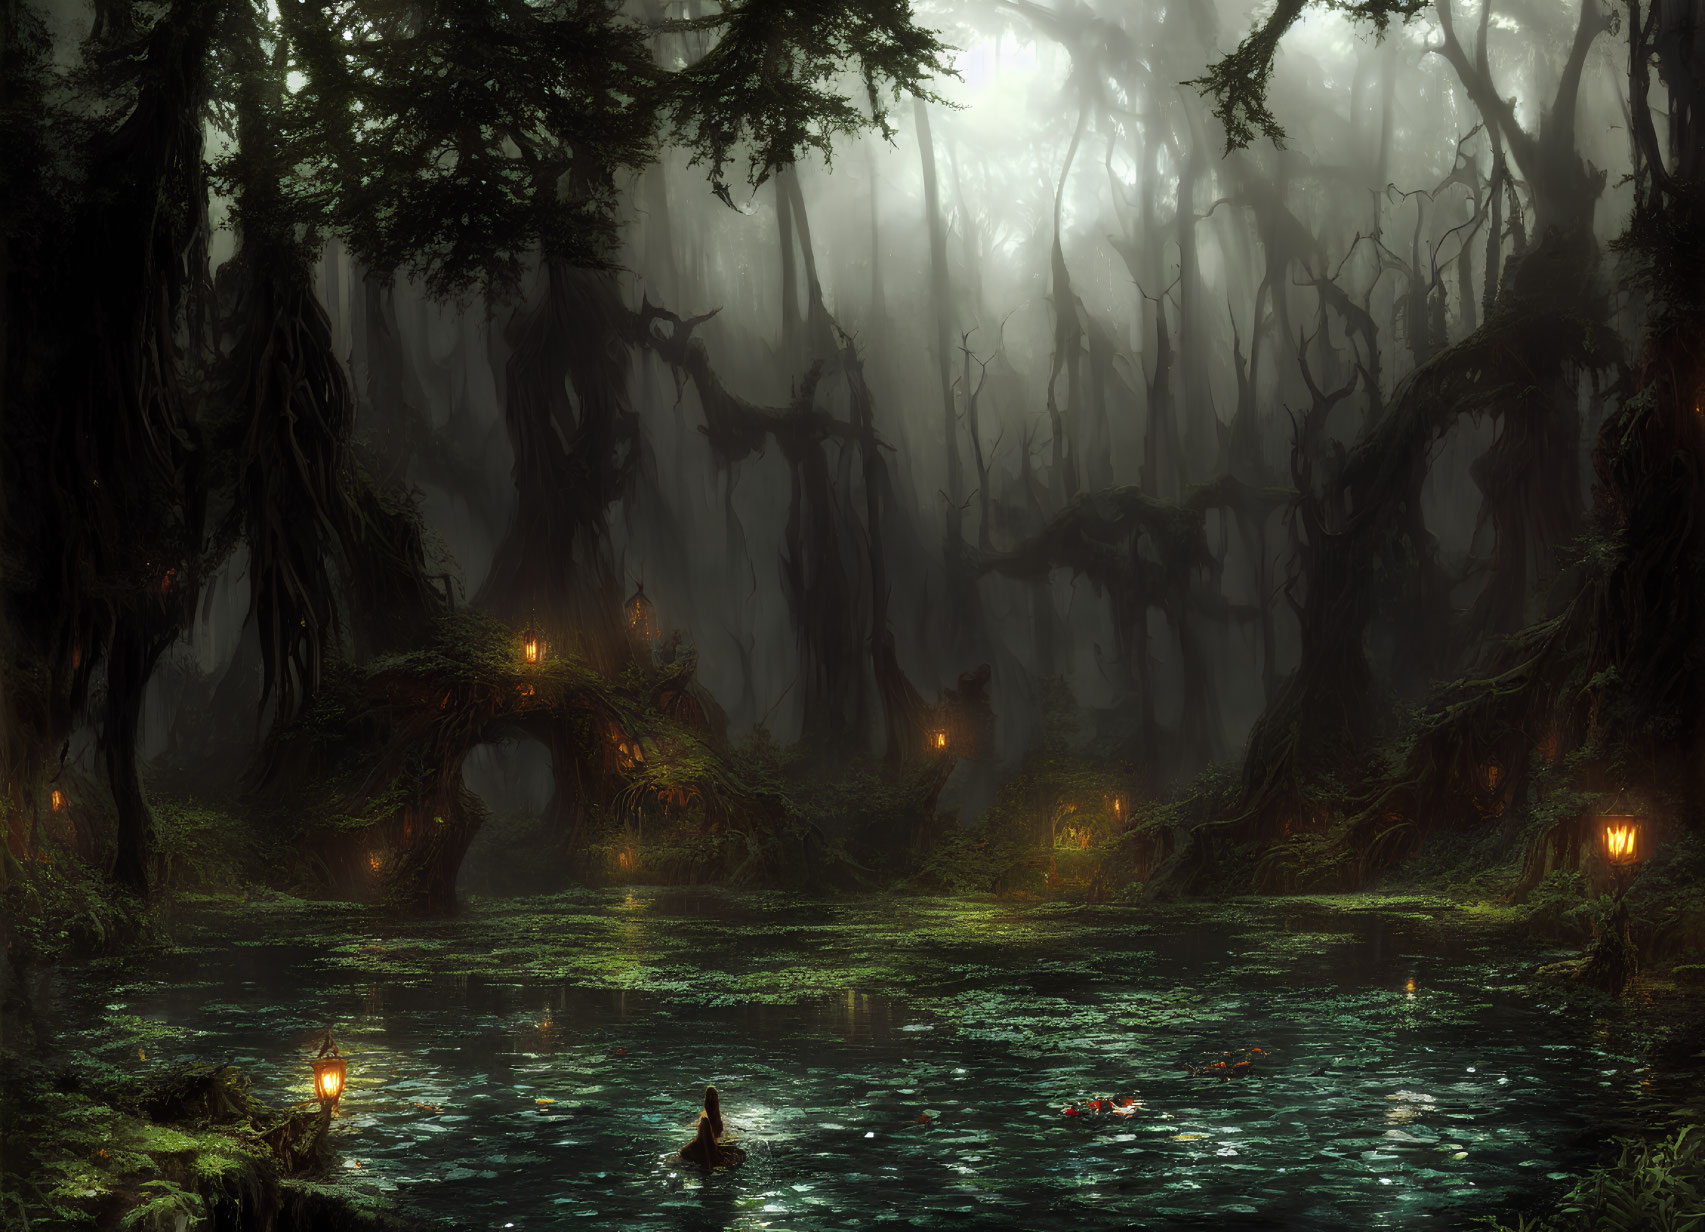 Misty forest with twisted trees, serene water, and glowing lanterns